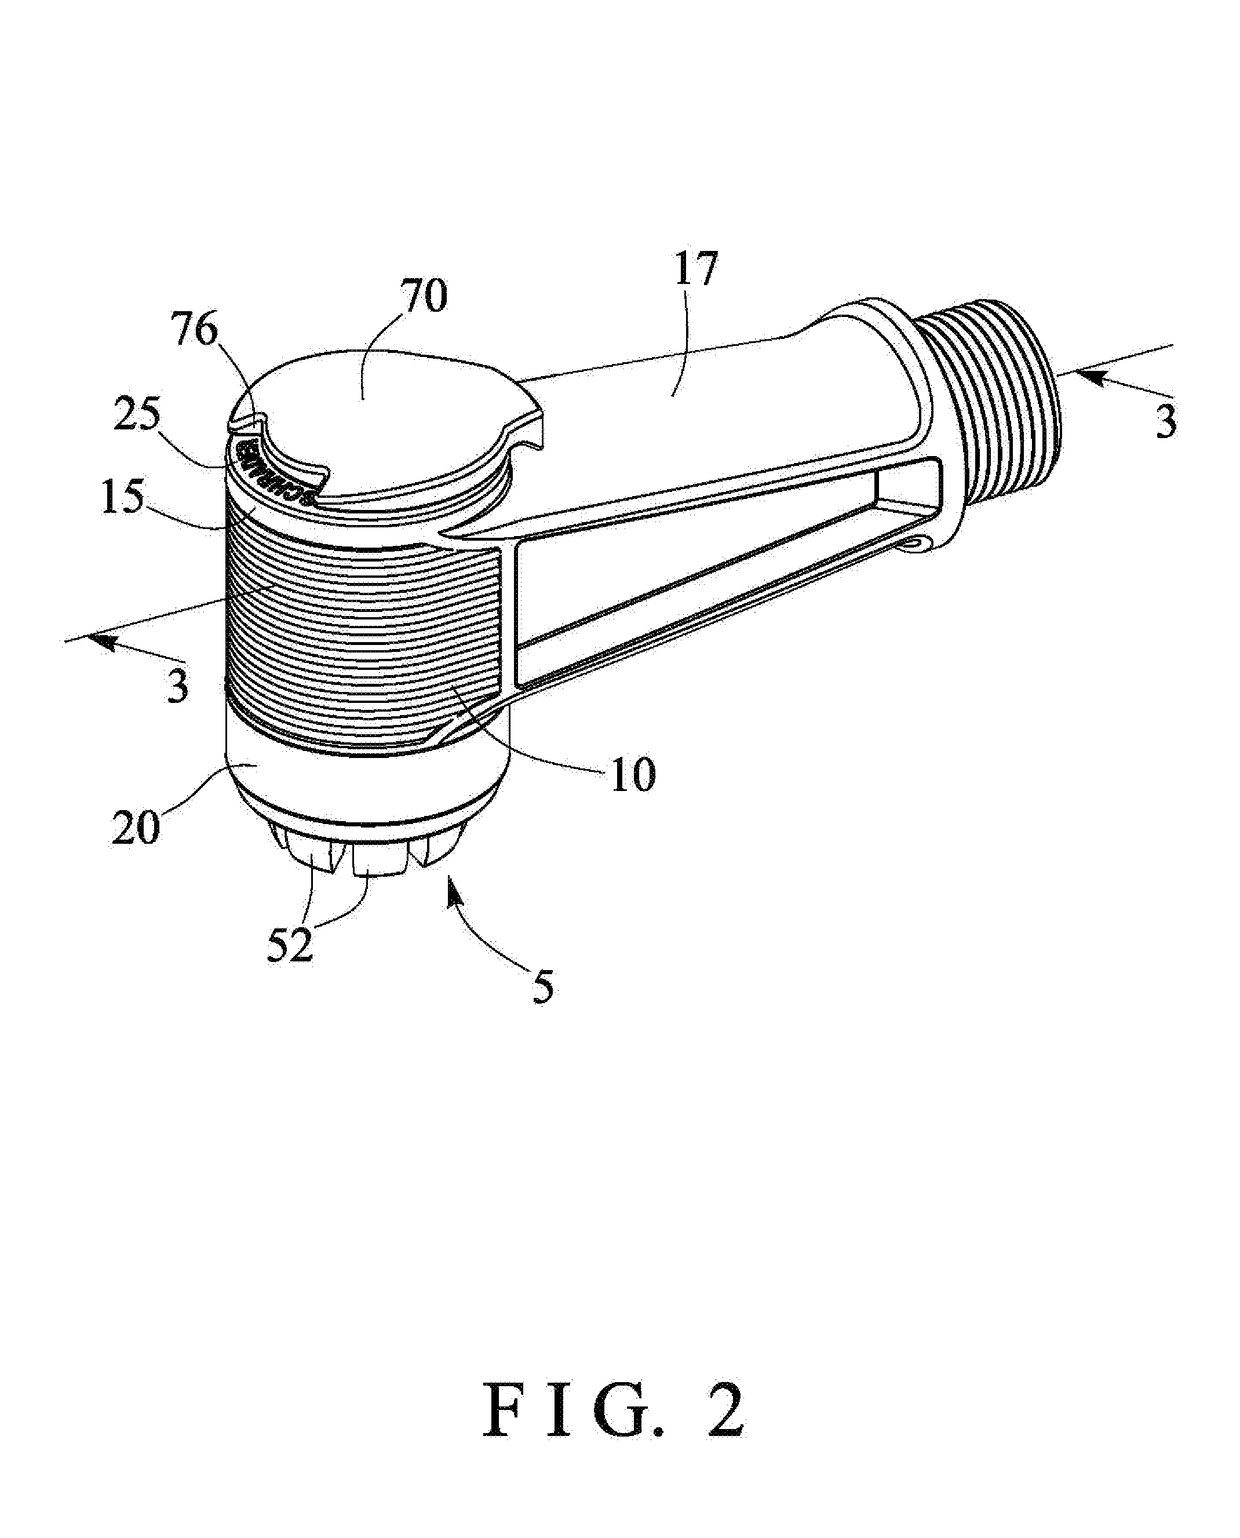 Air valve connecting device having pivotal actuating knob